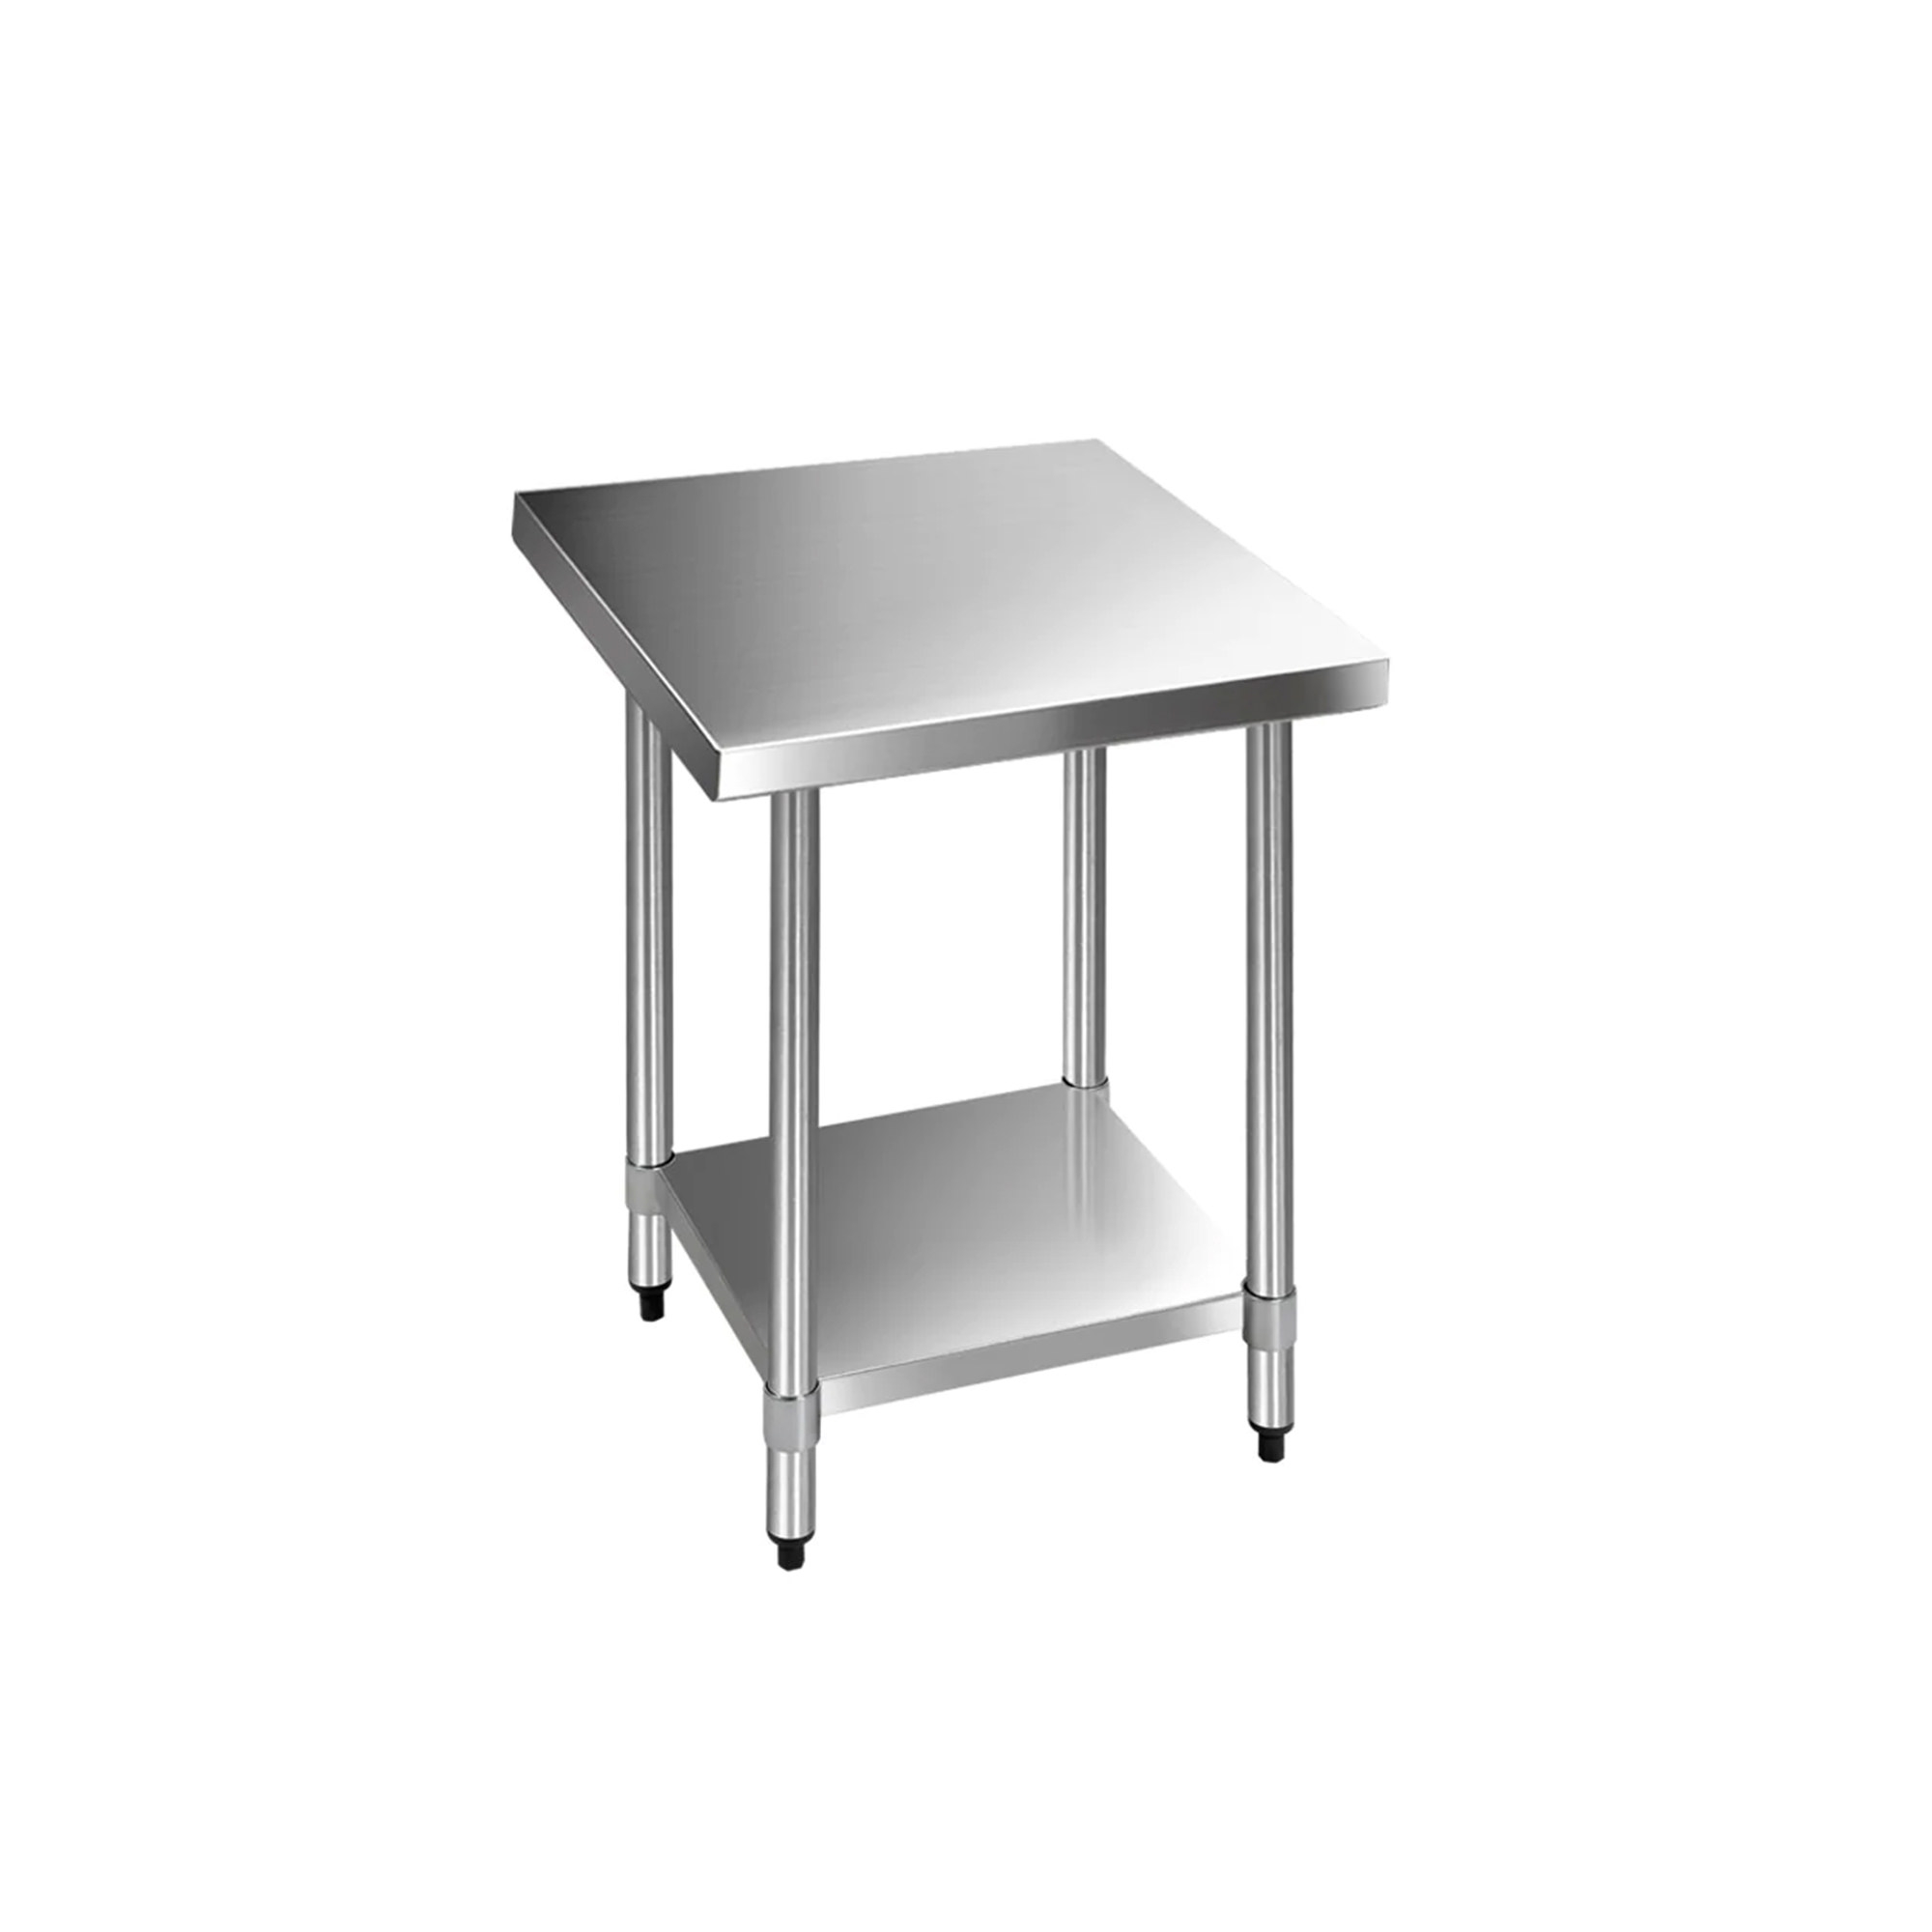 Cefito 430 Stainless Steel Kitchen Bench 76x76cm Image 2